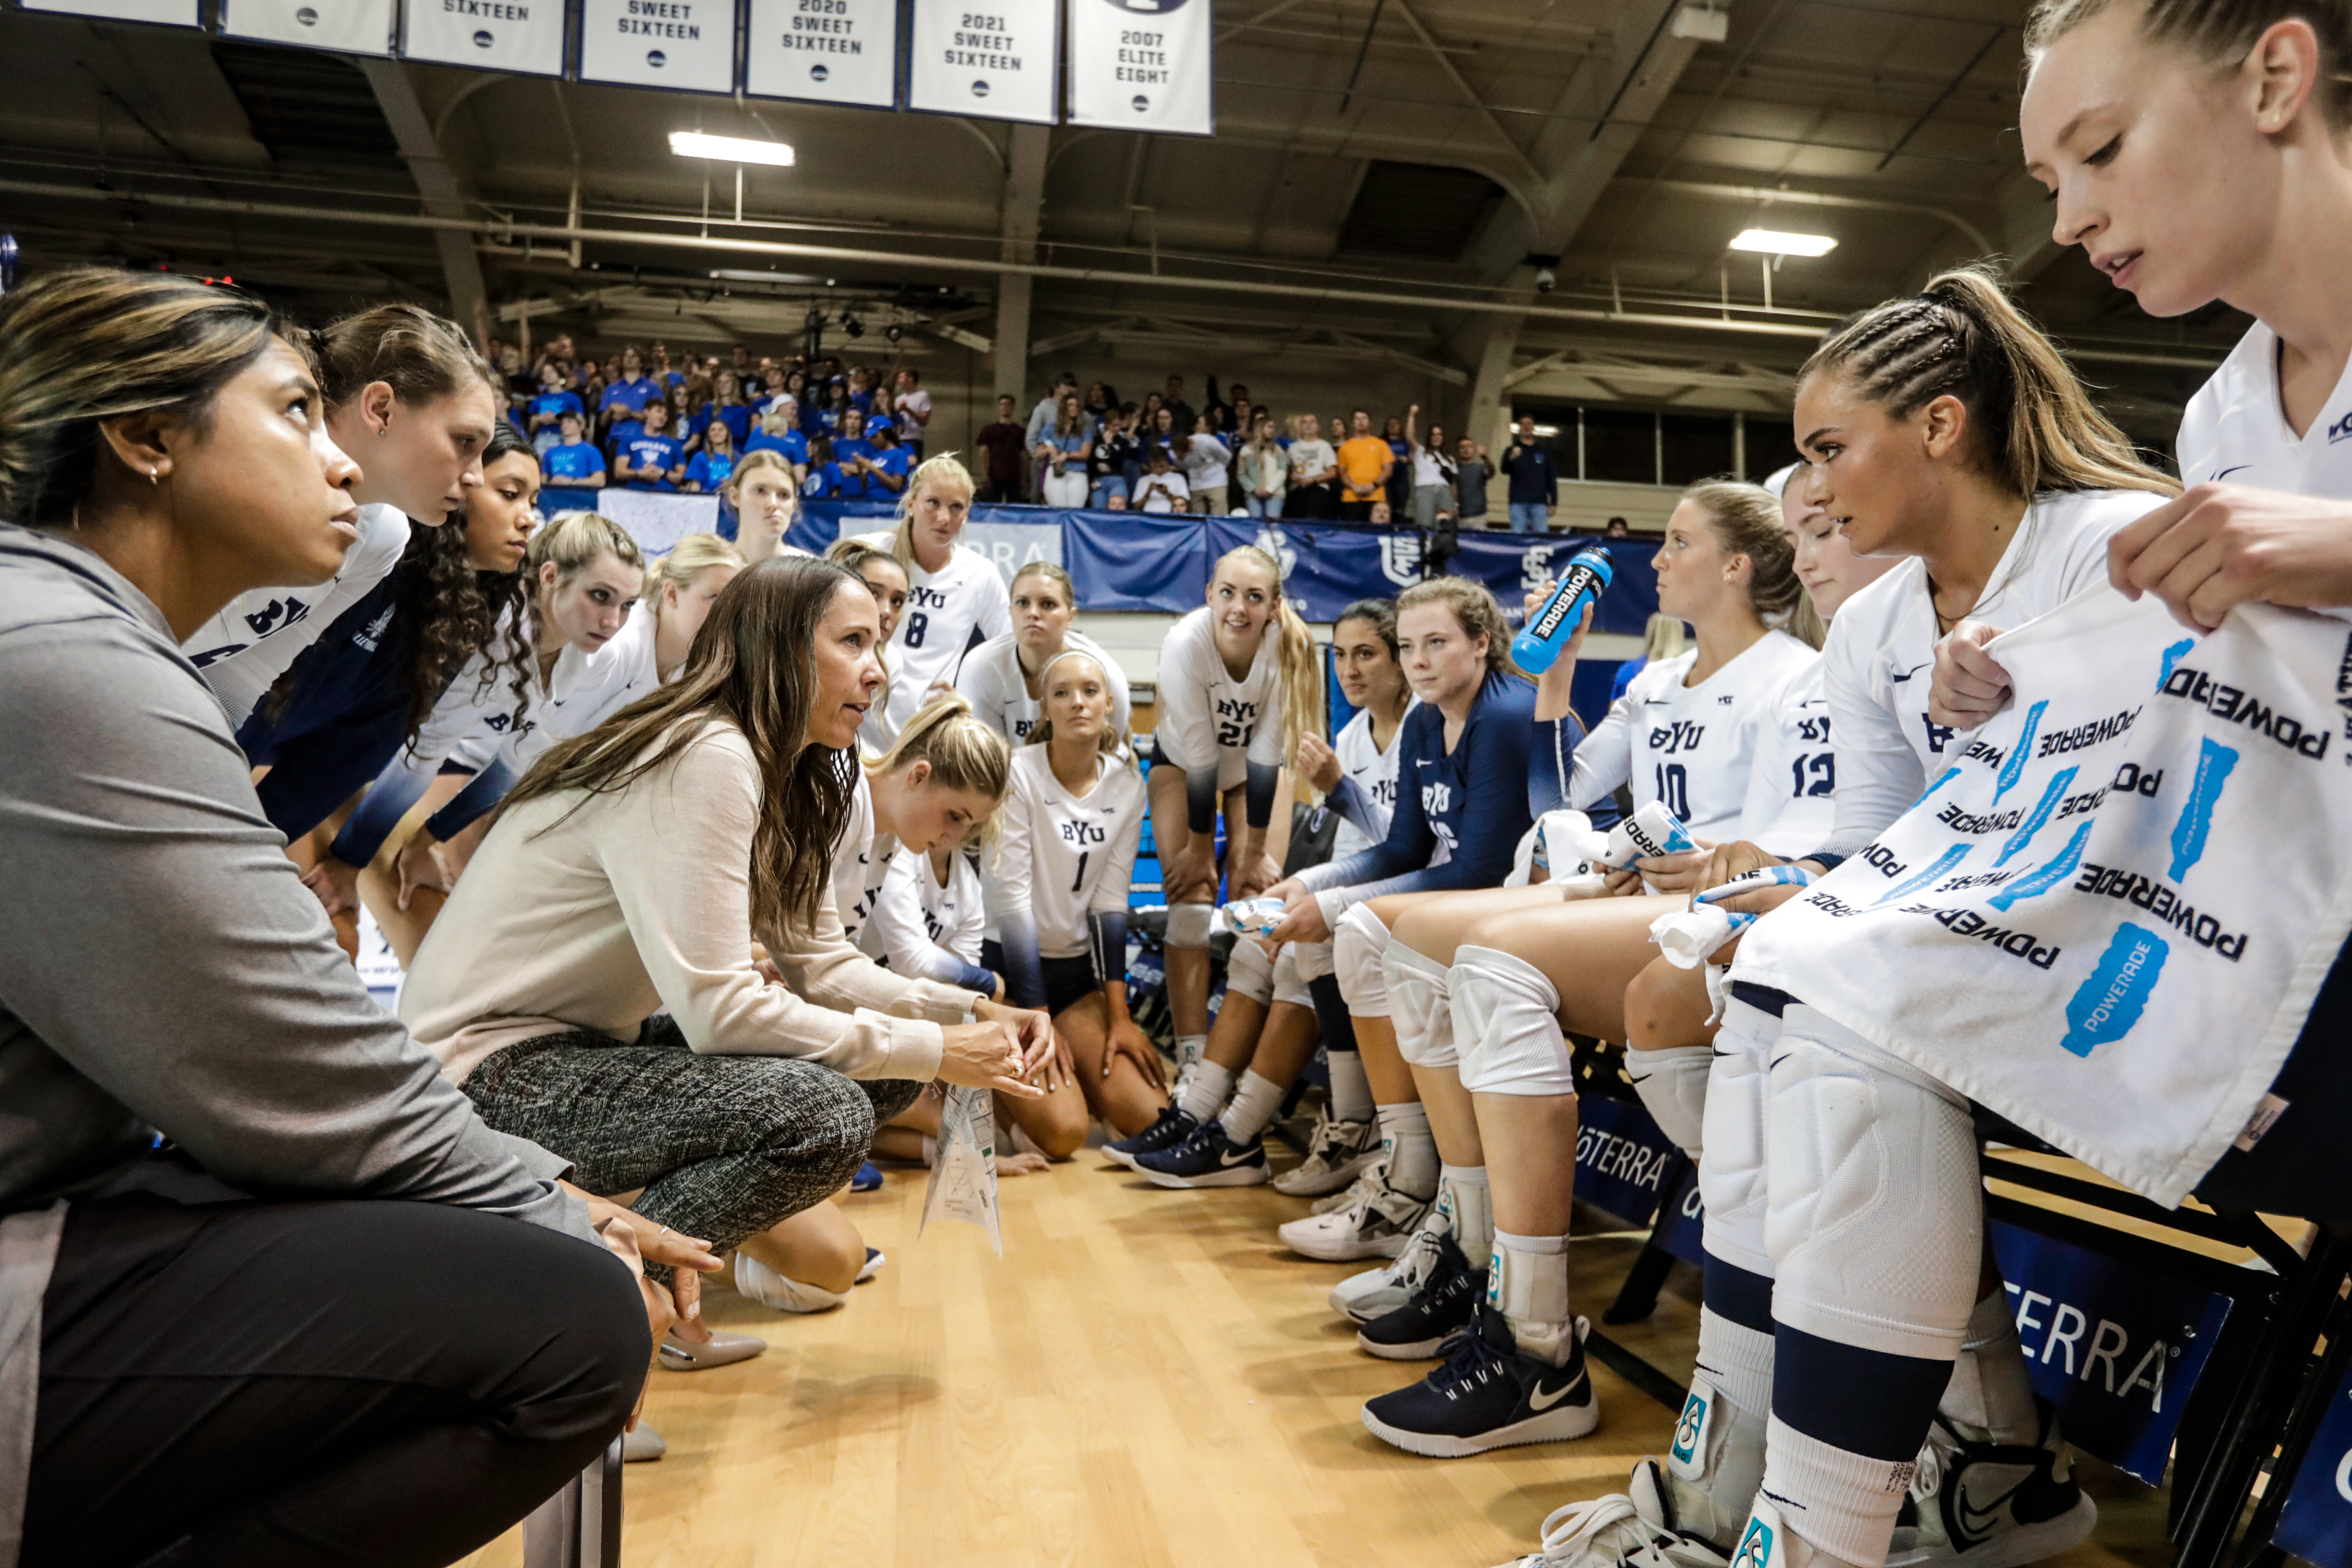 Heather Olmstead coaches her team during a game against LMU.